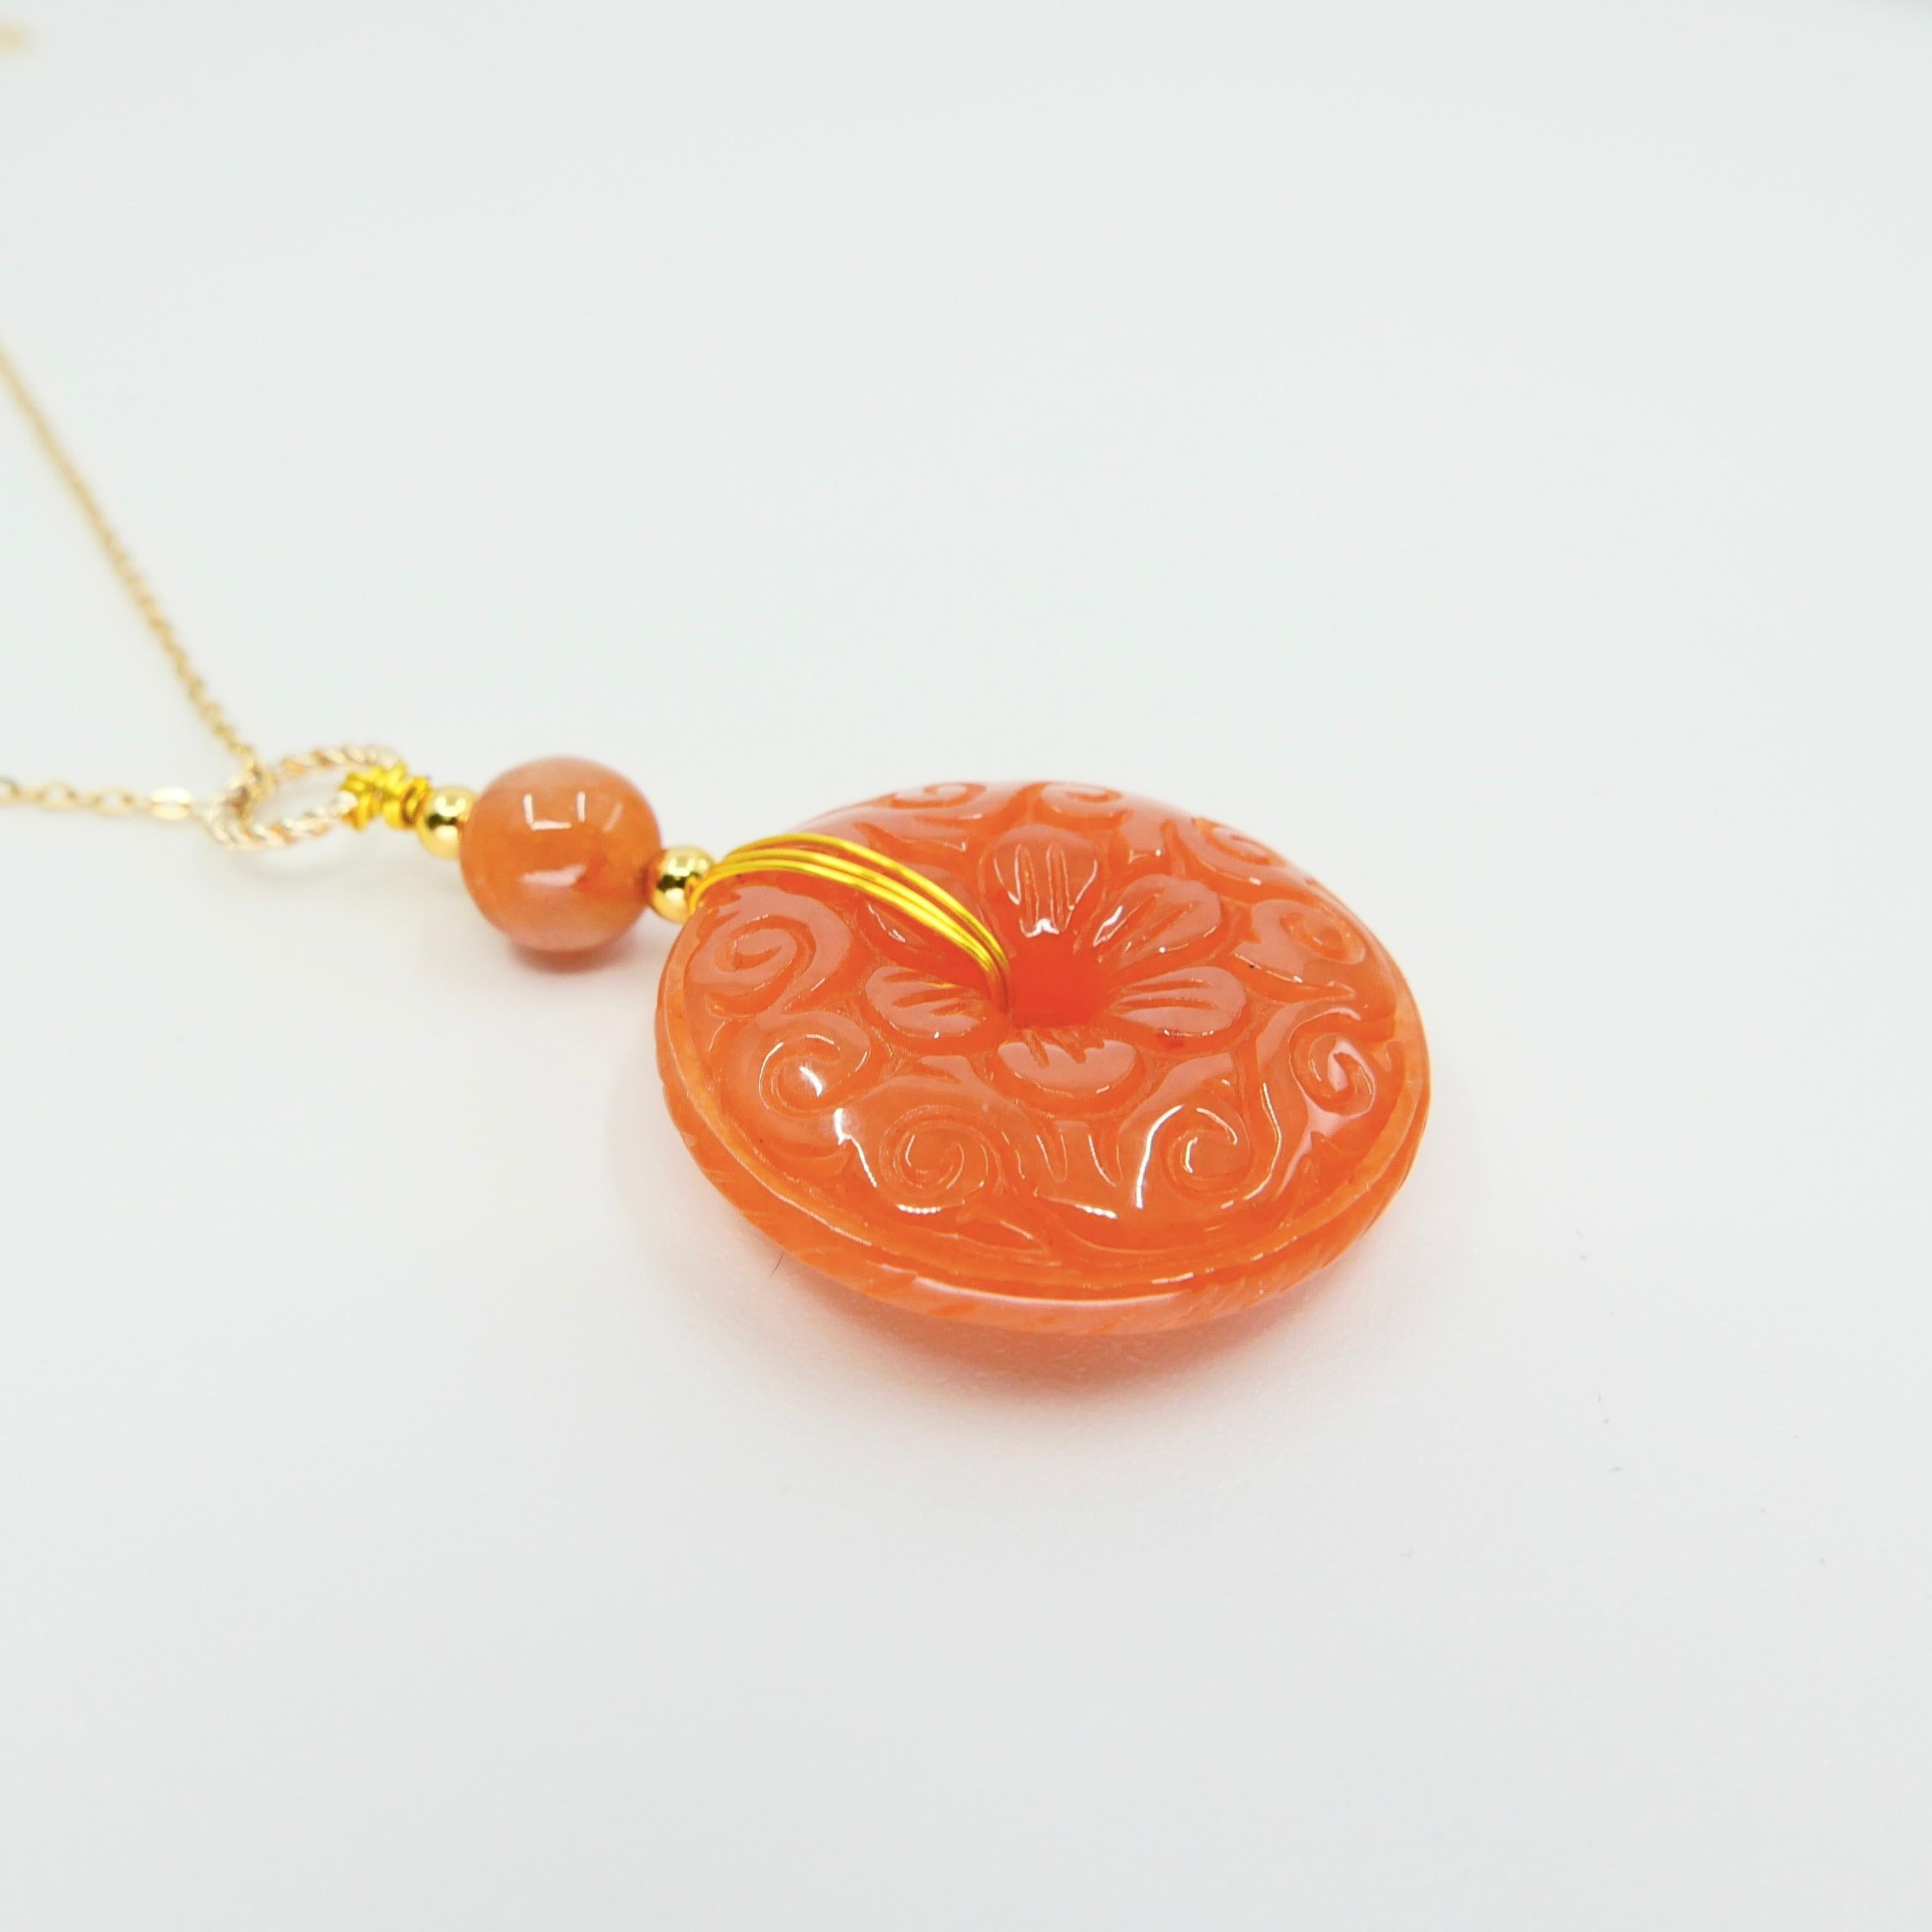 Rough Cut Certified Red Jadeite Jade Pendant Drop Necklace, Hand Gold Wiring Workmanship For Sale